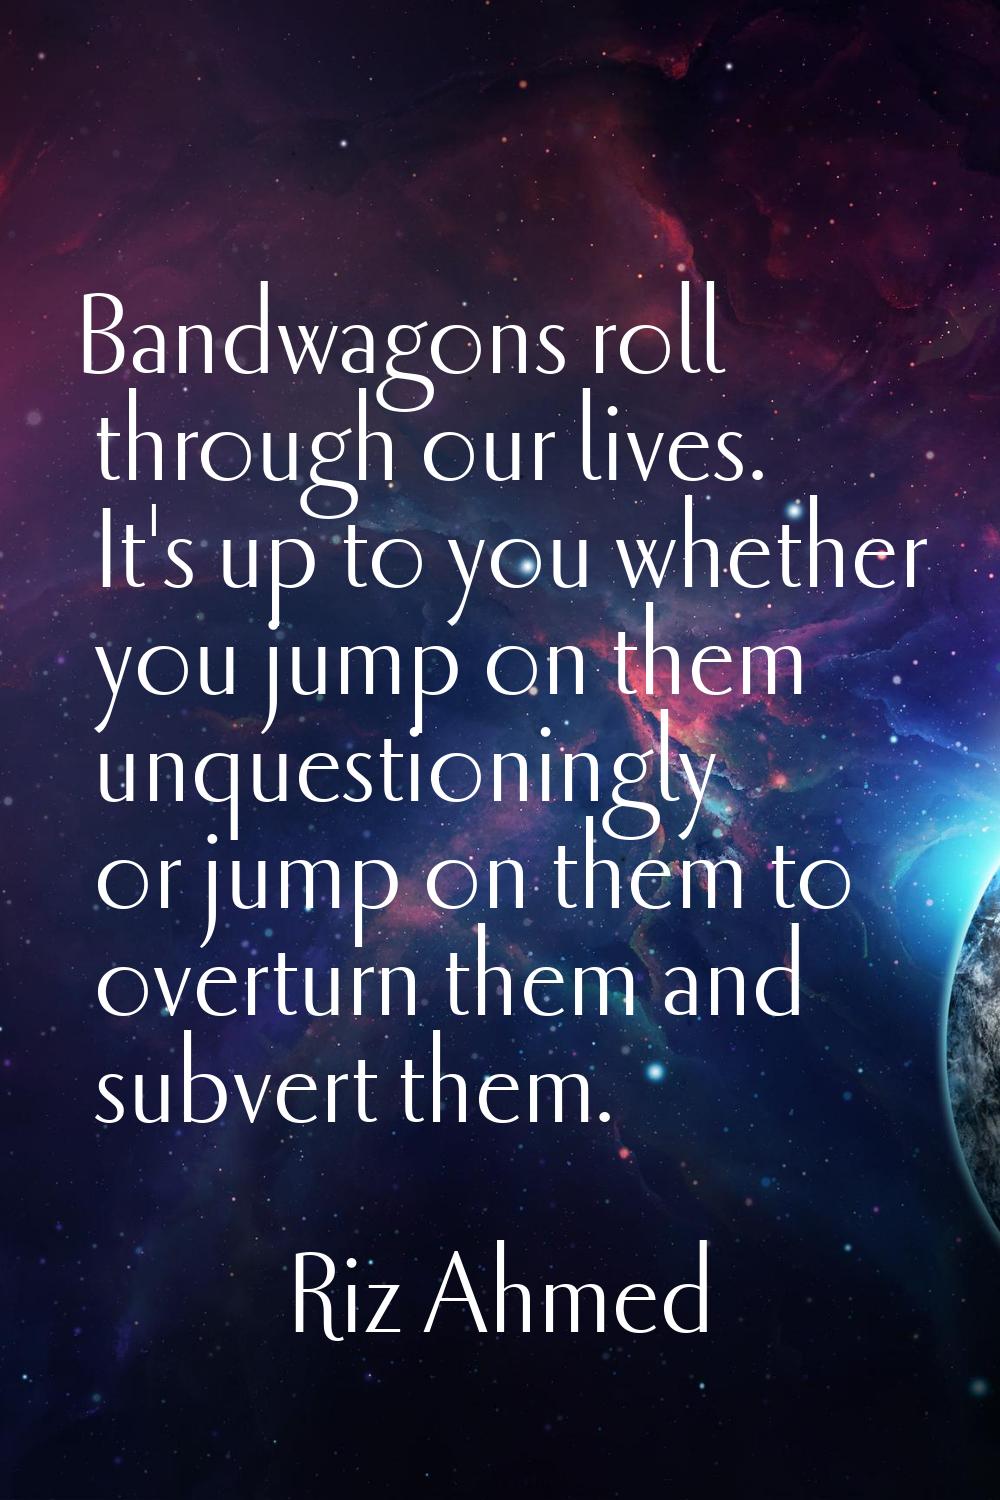 Bandwagons roll through our lives. It's up to you whether you jump on them unquestioningly or jump 